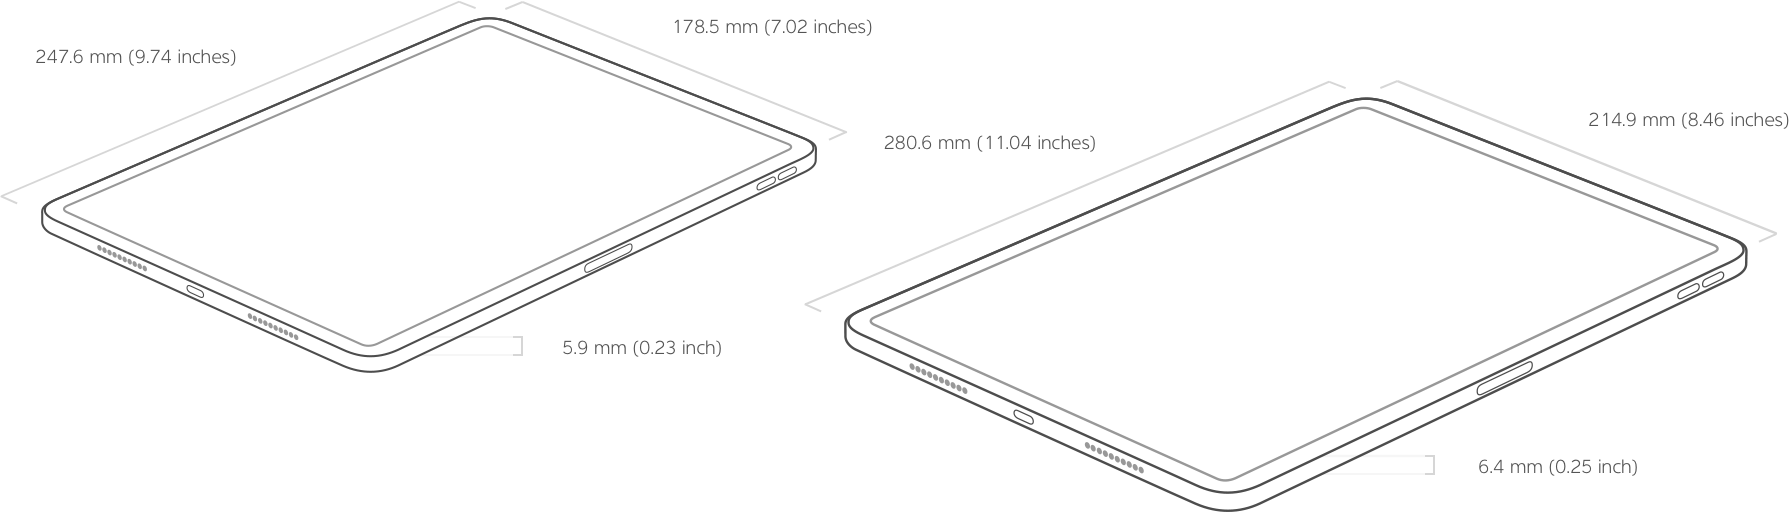 IPad Pro, size and weight